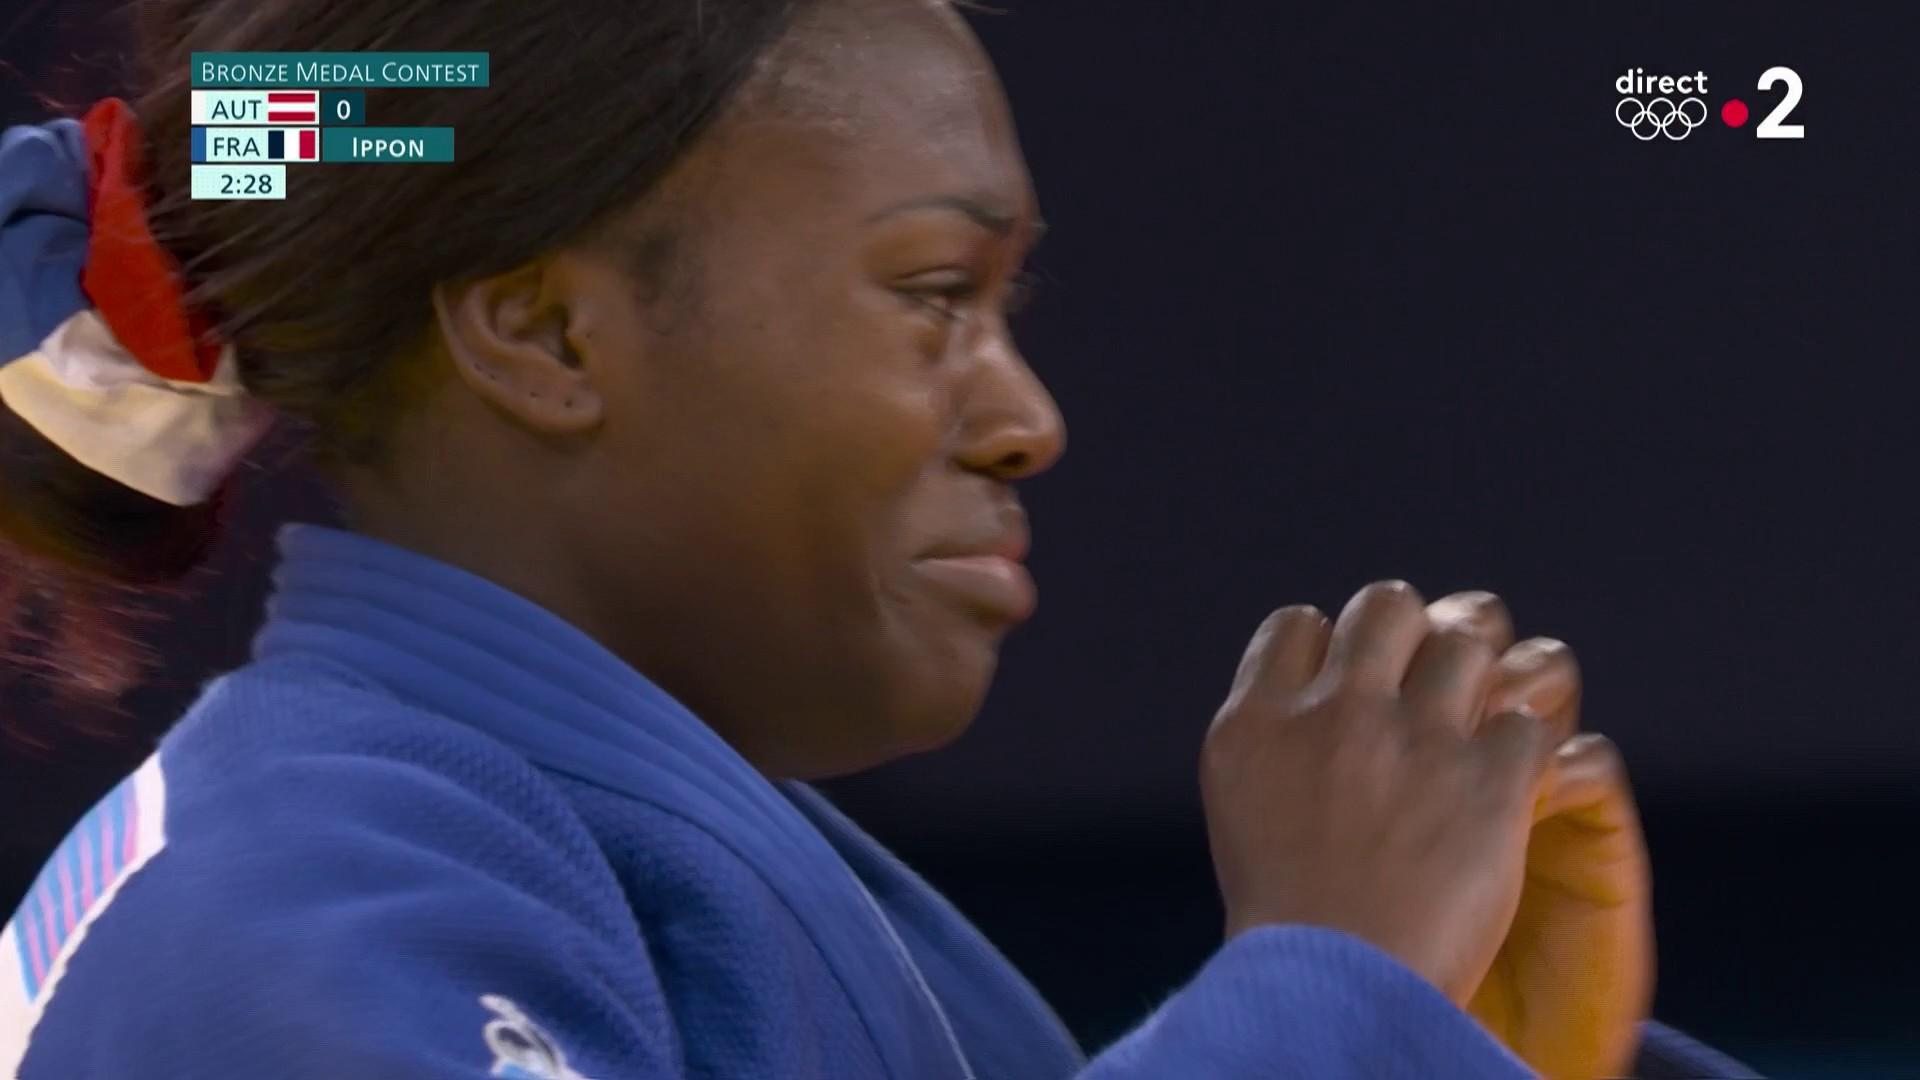 Facing the Austrian Lubjana Piovesana in her fight for bronze, Clarisse Agbegnenou won by ippon on Tuesday July 30.